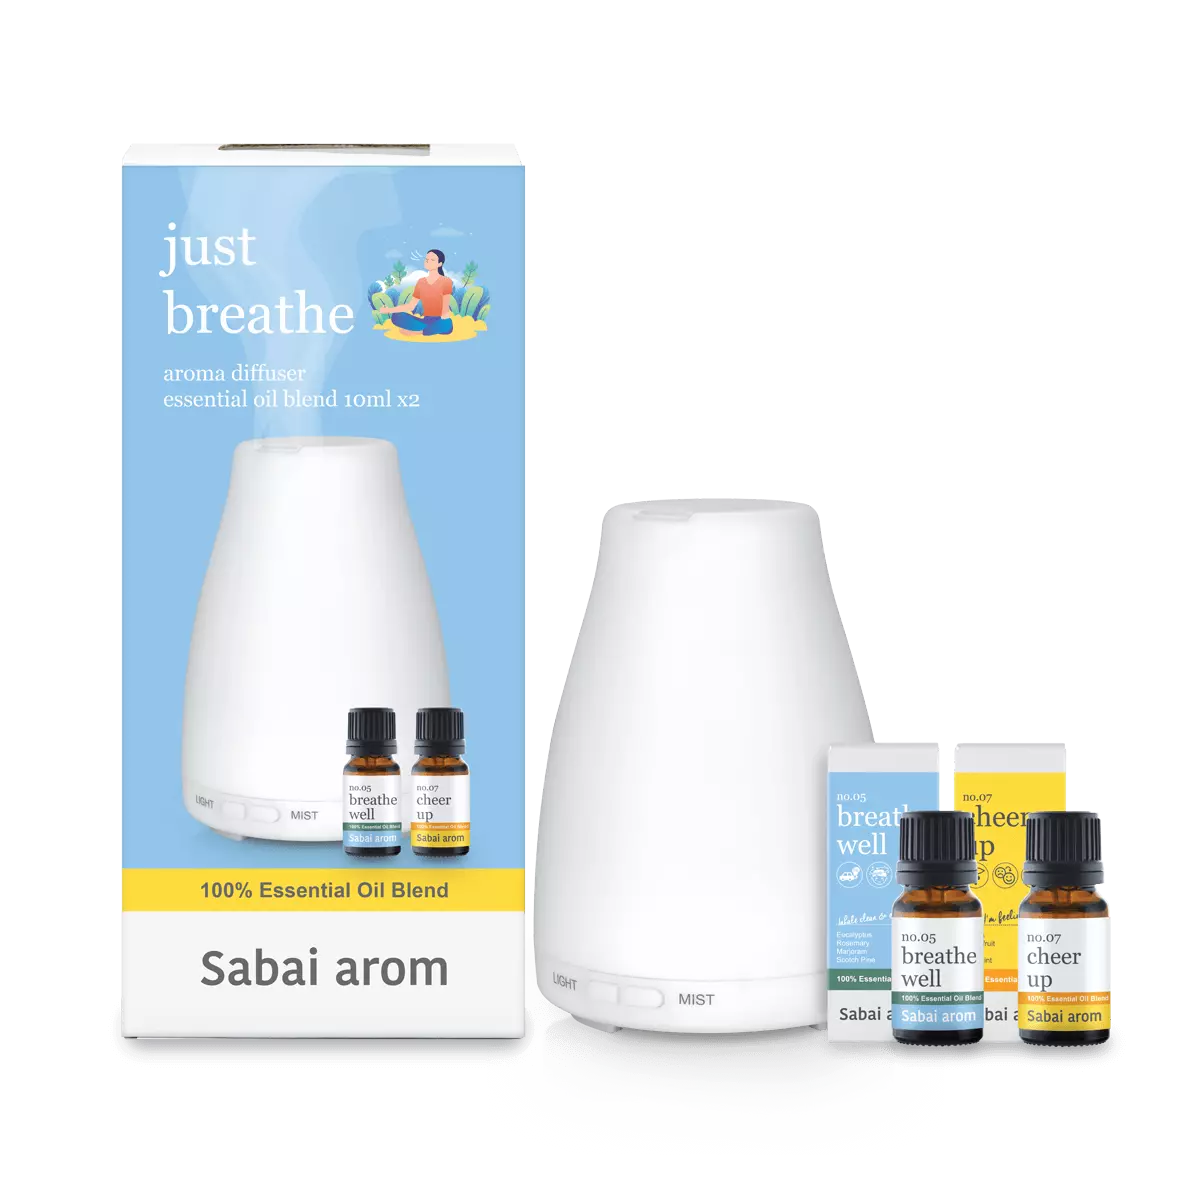 just breathe aroma diffuser1 <h2>Set of Aroma Diffuser with 2 Essential Oils Blend</h2> • Aroma Diffuser 100 ml. • No.05 Breathe well essential oil blend 10 ml. • No.07 Cheer up essential oil blend 10 ml.